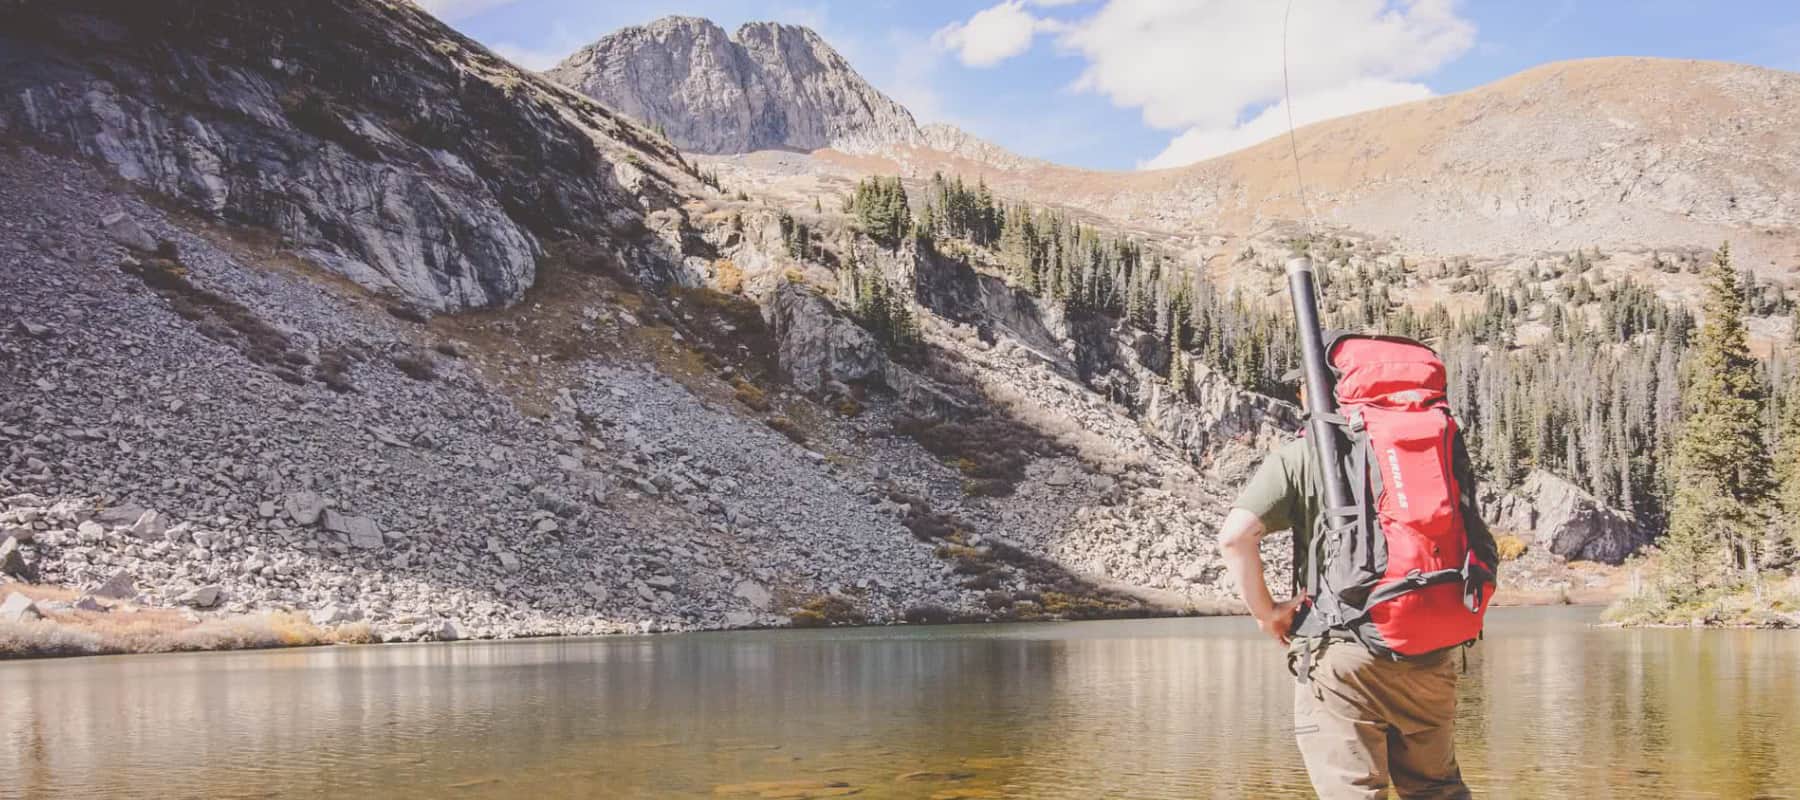 A man looks over the waters and contemplates fishing an alpine lake in Colorado